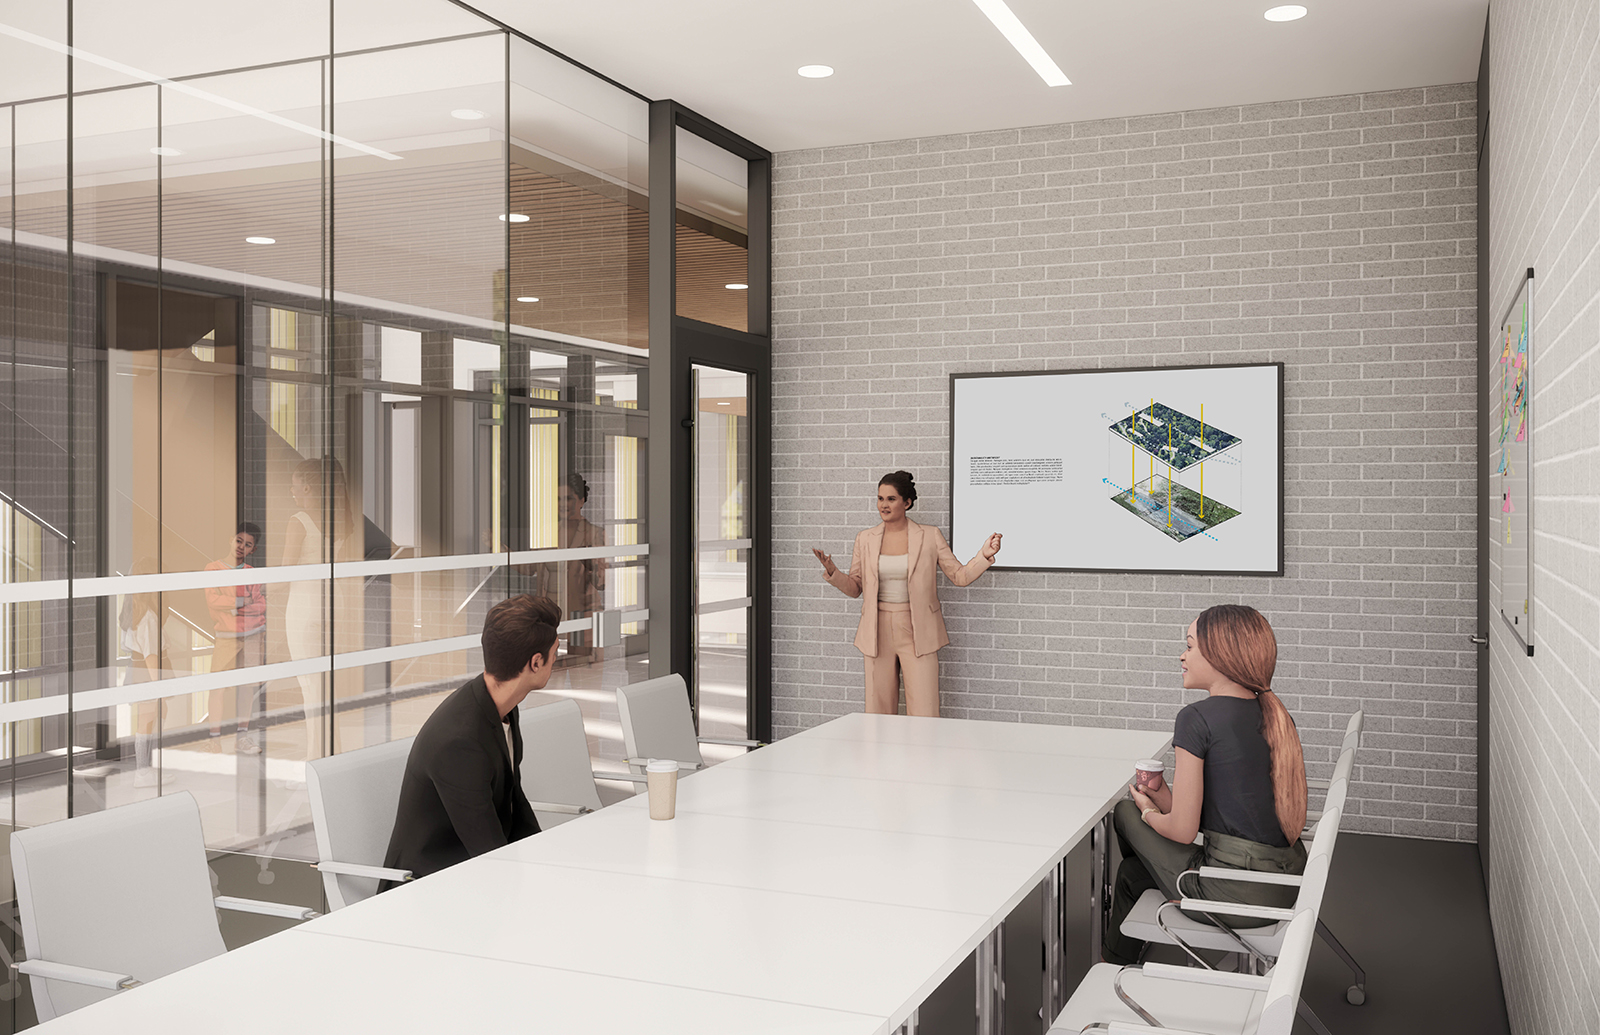 A rendering of a meeting room. There is a long table surrounded by chairs in the centre of the room. There is a TV along the back wall for presentations. There is a white board on the right wall. The left wall is glass looking into the second floor lobby and out the south side of the building. In this image two people are seated while one person stands beside a TV screen, presenting.